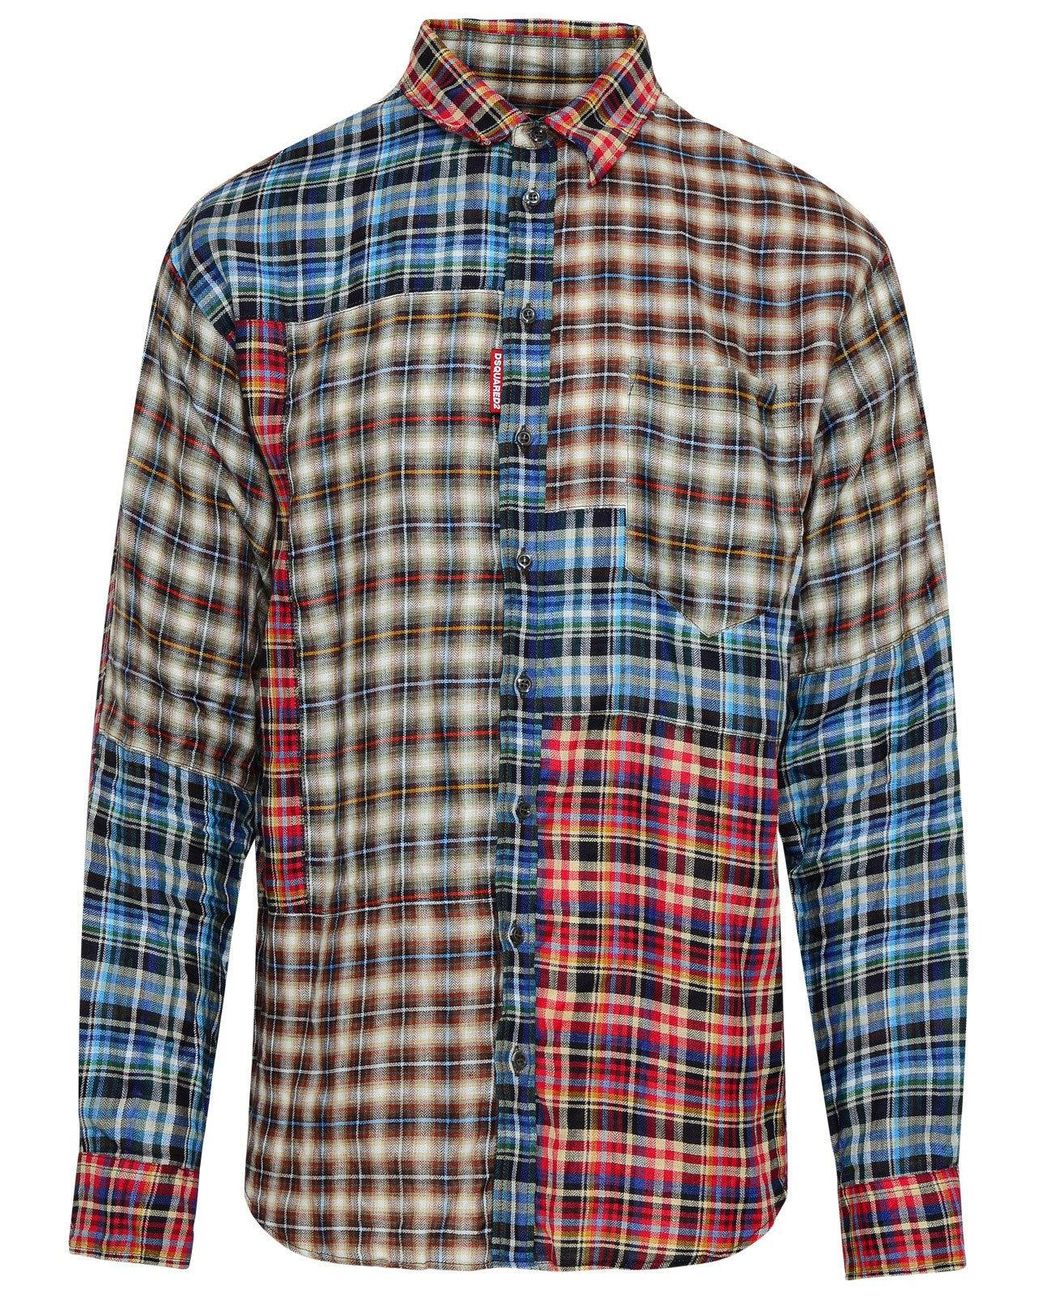 DSquared² Red And Blue Linen Check Mix Shirt for Men - Save 9% - Lyst